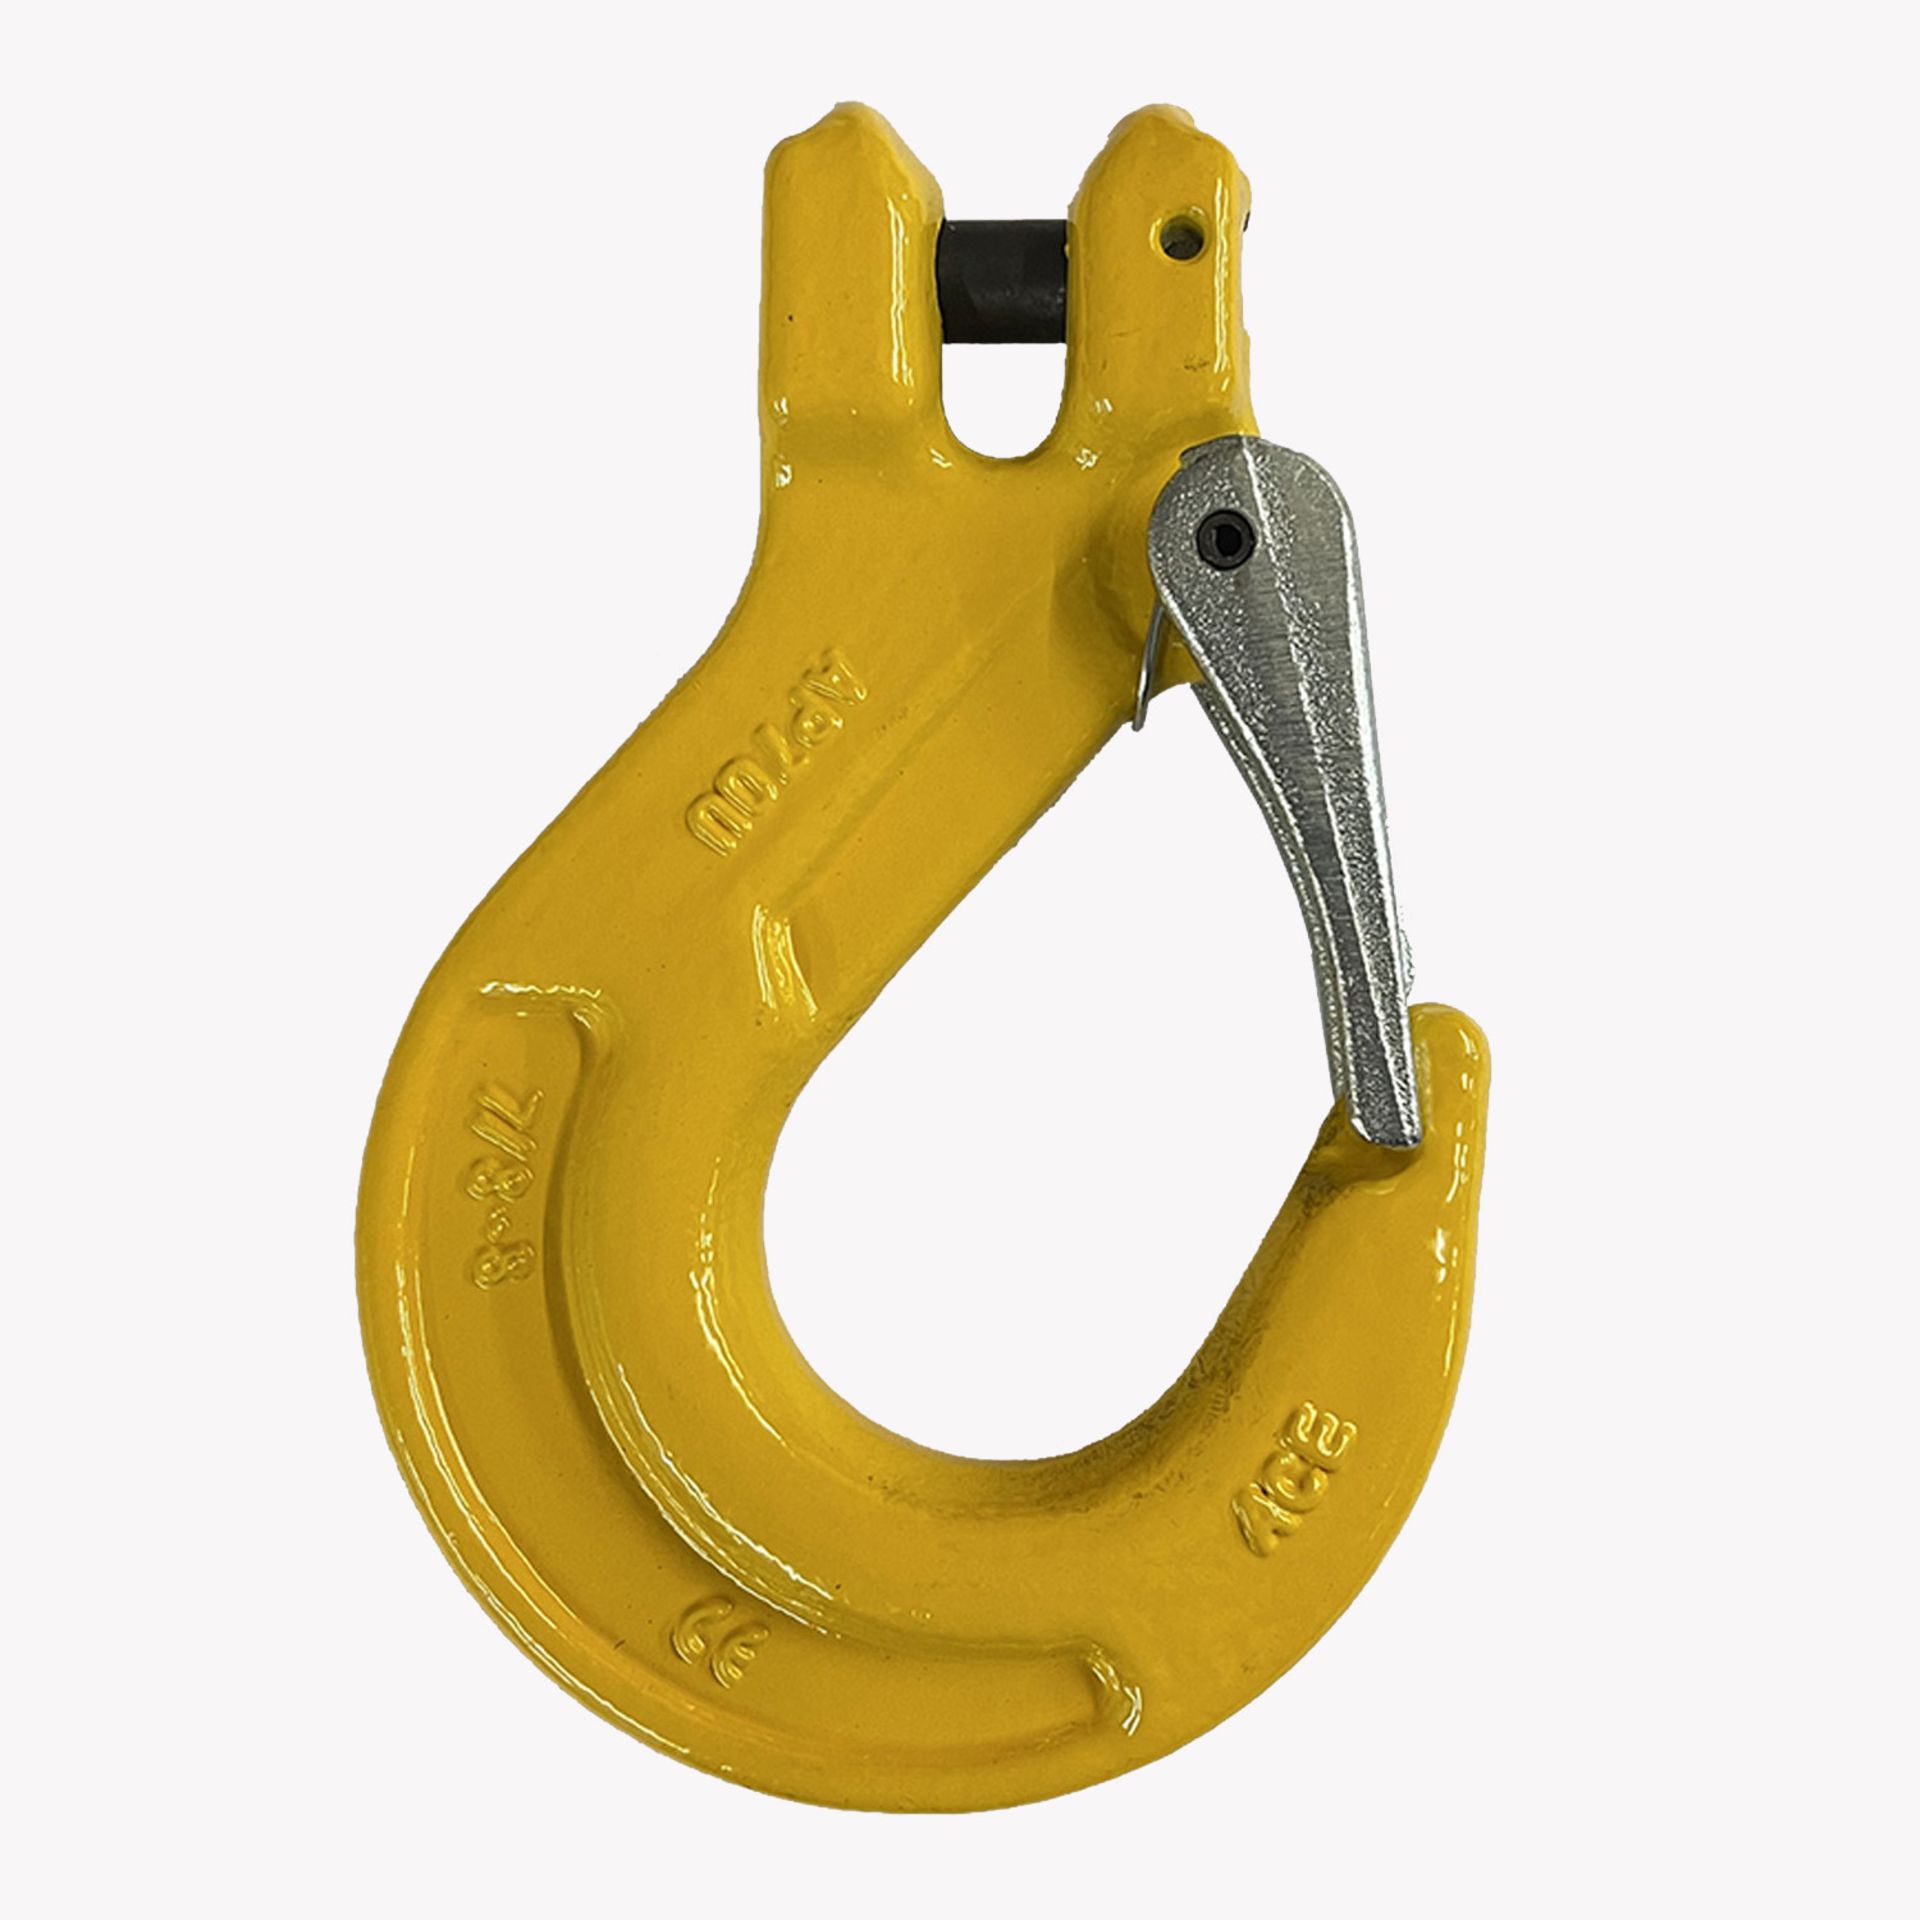 4 X 16mm Grade 8 Clevis Sling Hook With Safety Catch (Yascsh16)